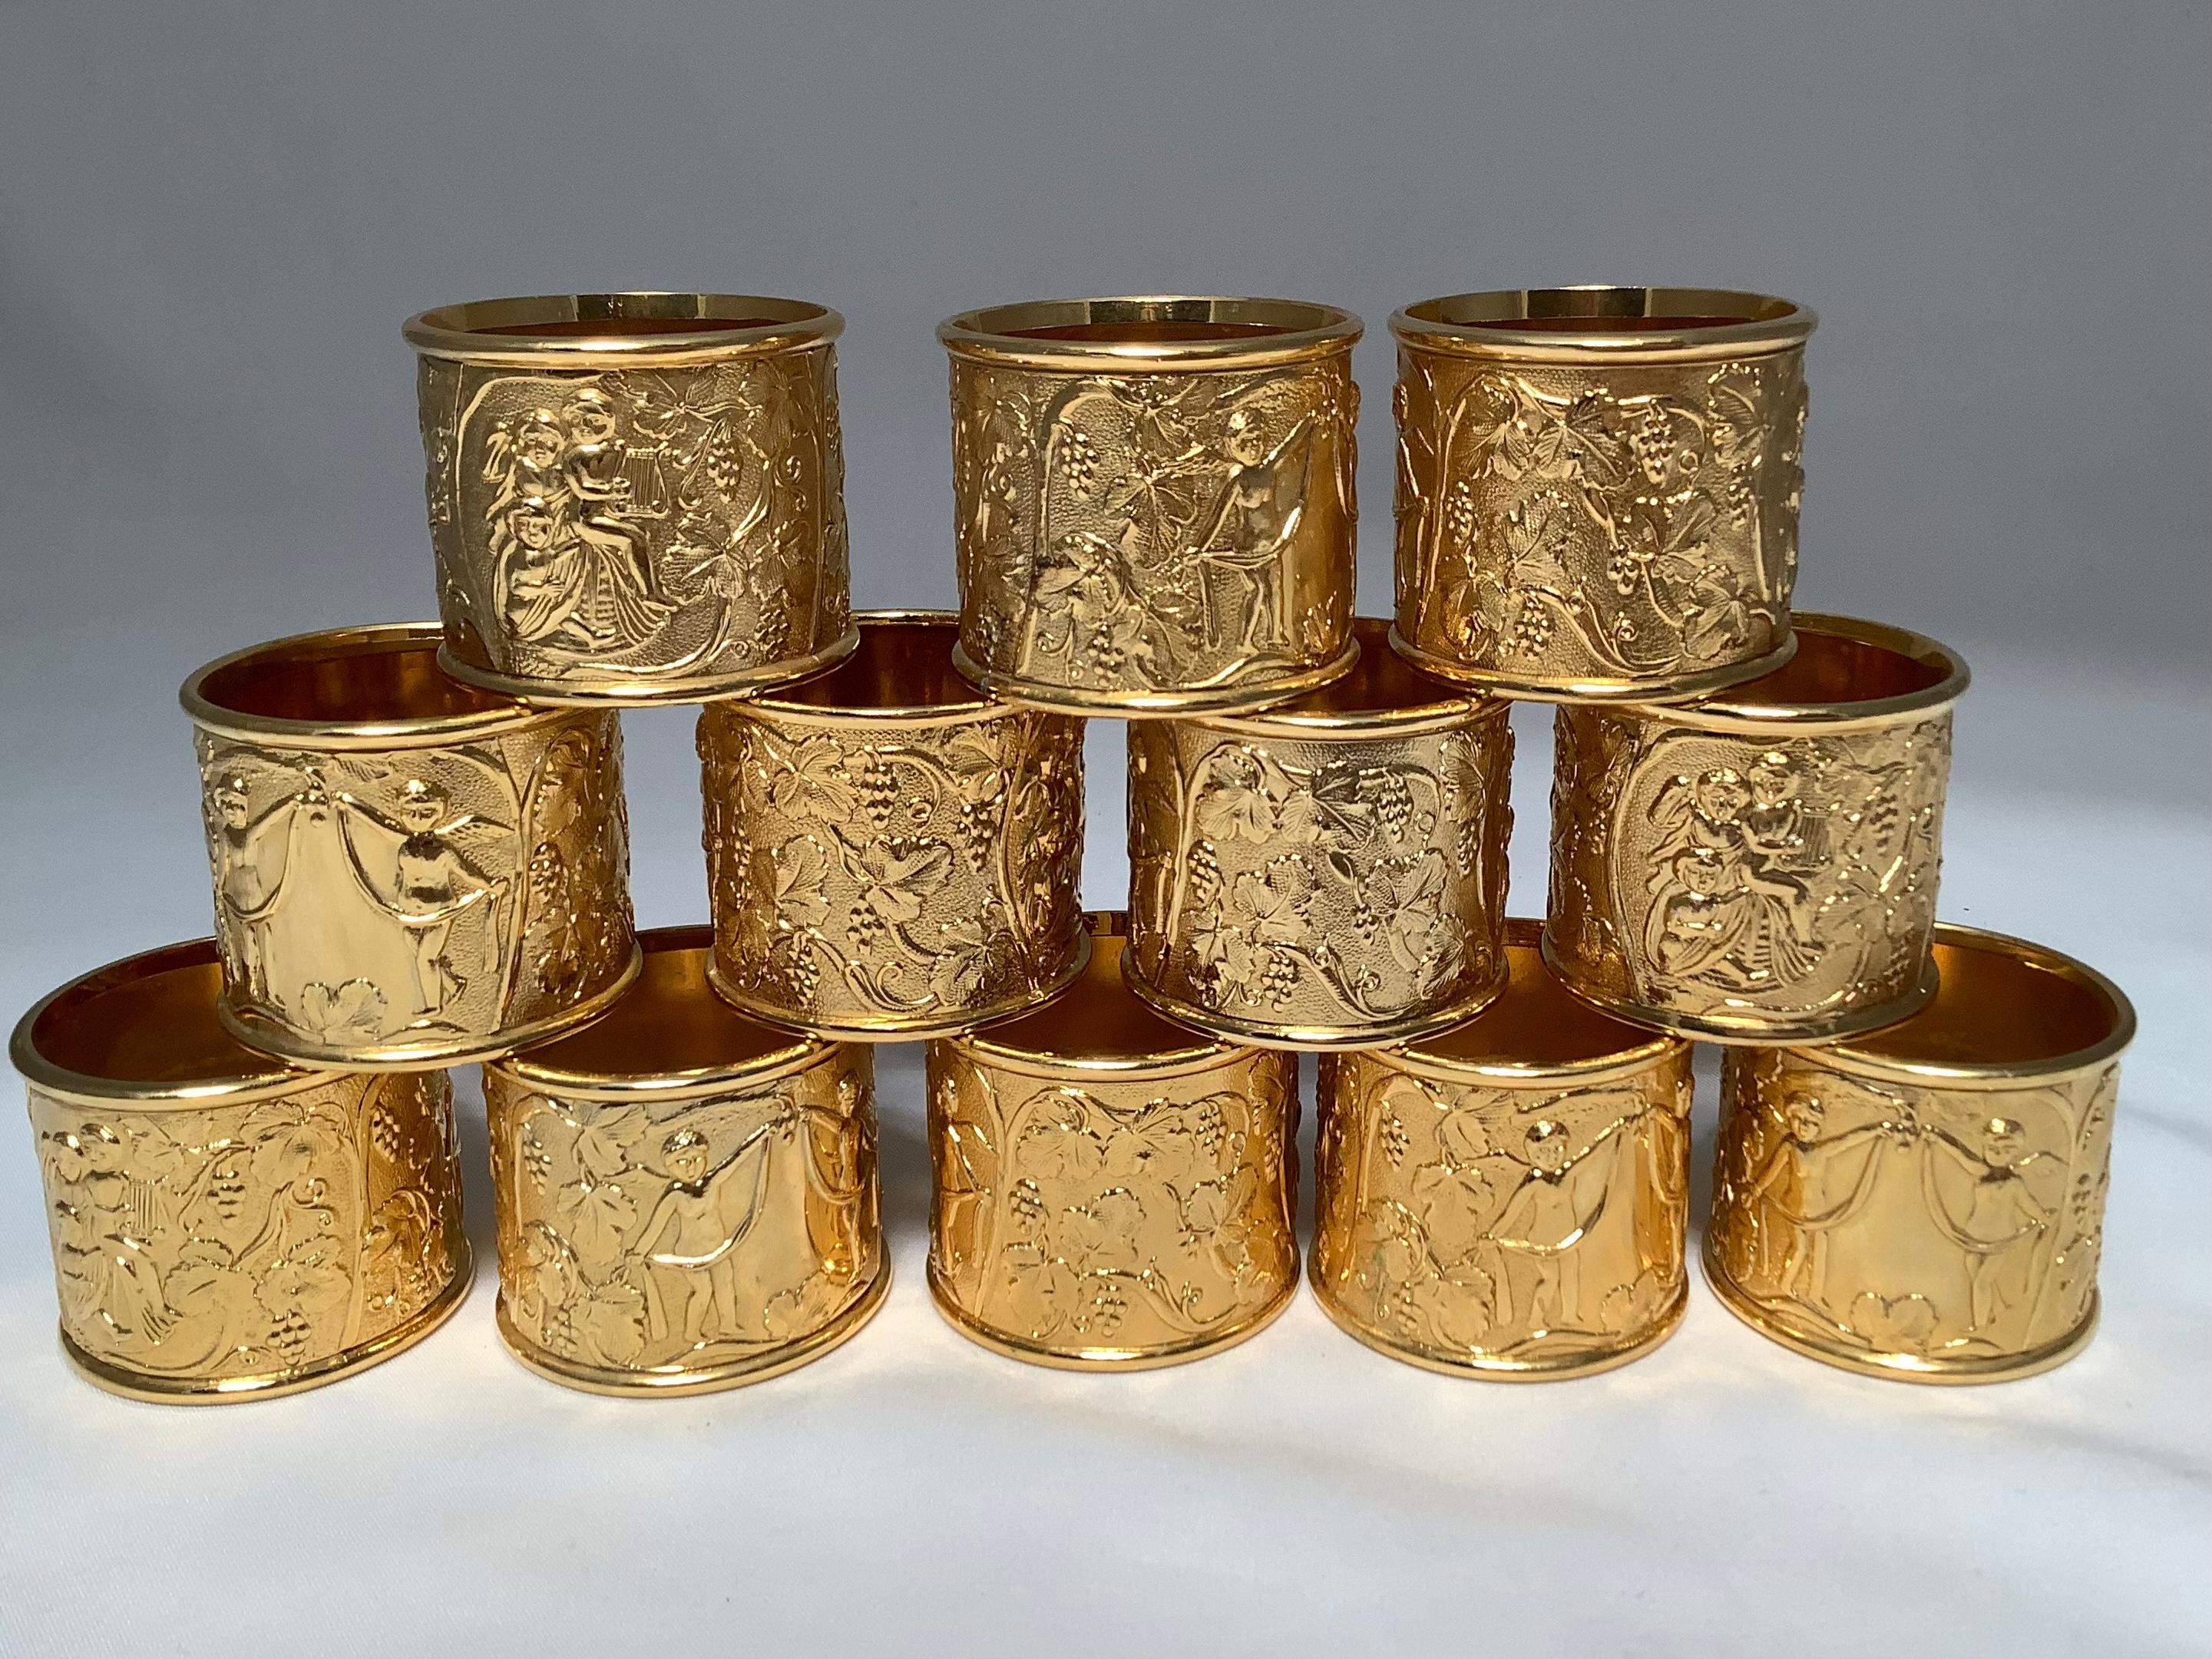 Set of twelve gold plated napkin rings. The beautifully cast napkin rings depict angels with swags and fruits and foliage throughout.